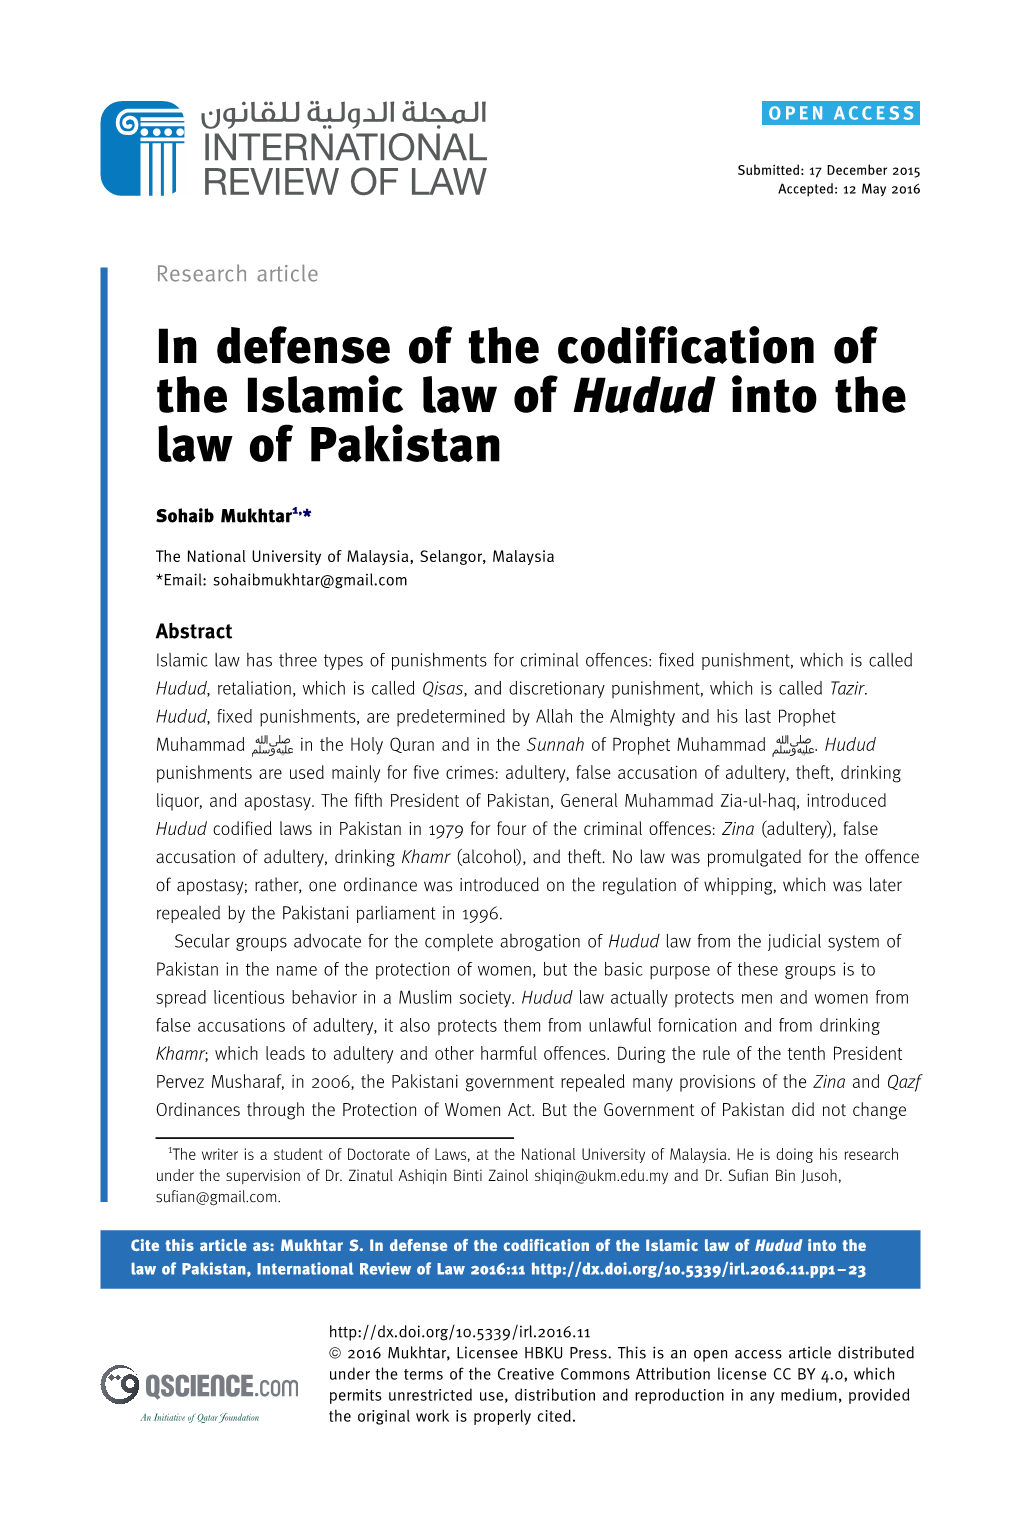 In Defense of the Codification of the Islamic Law of Hudud Into the Law of Pakistan